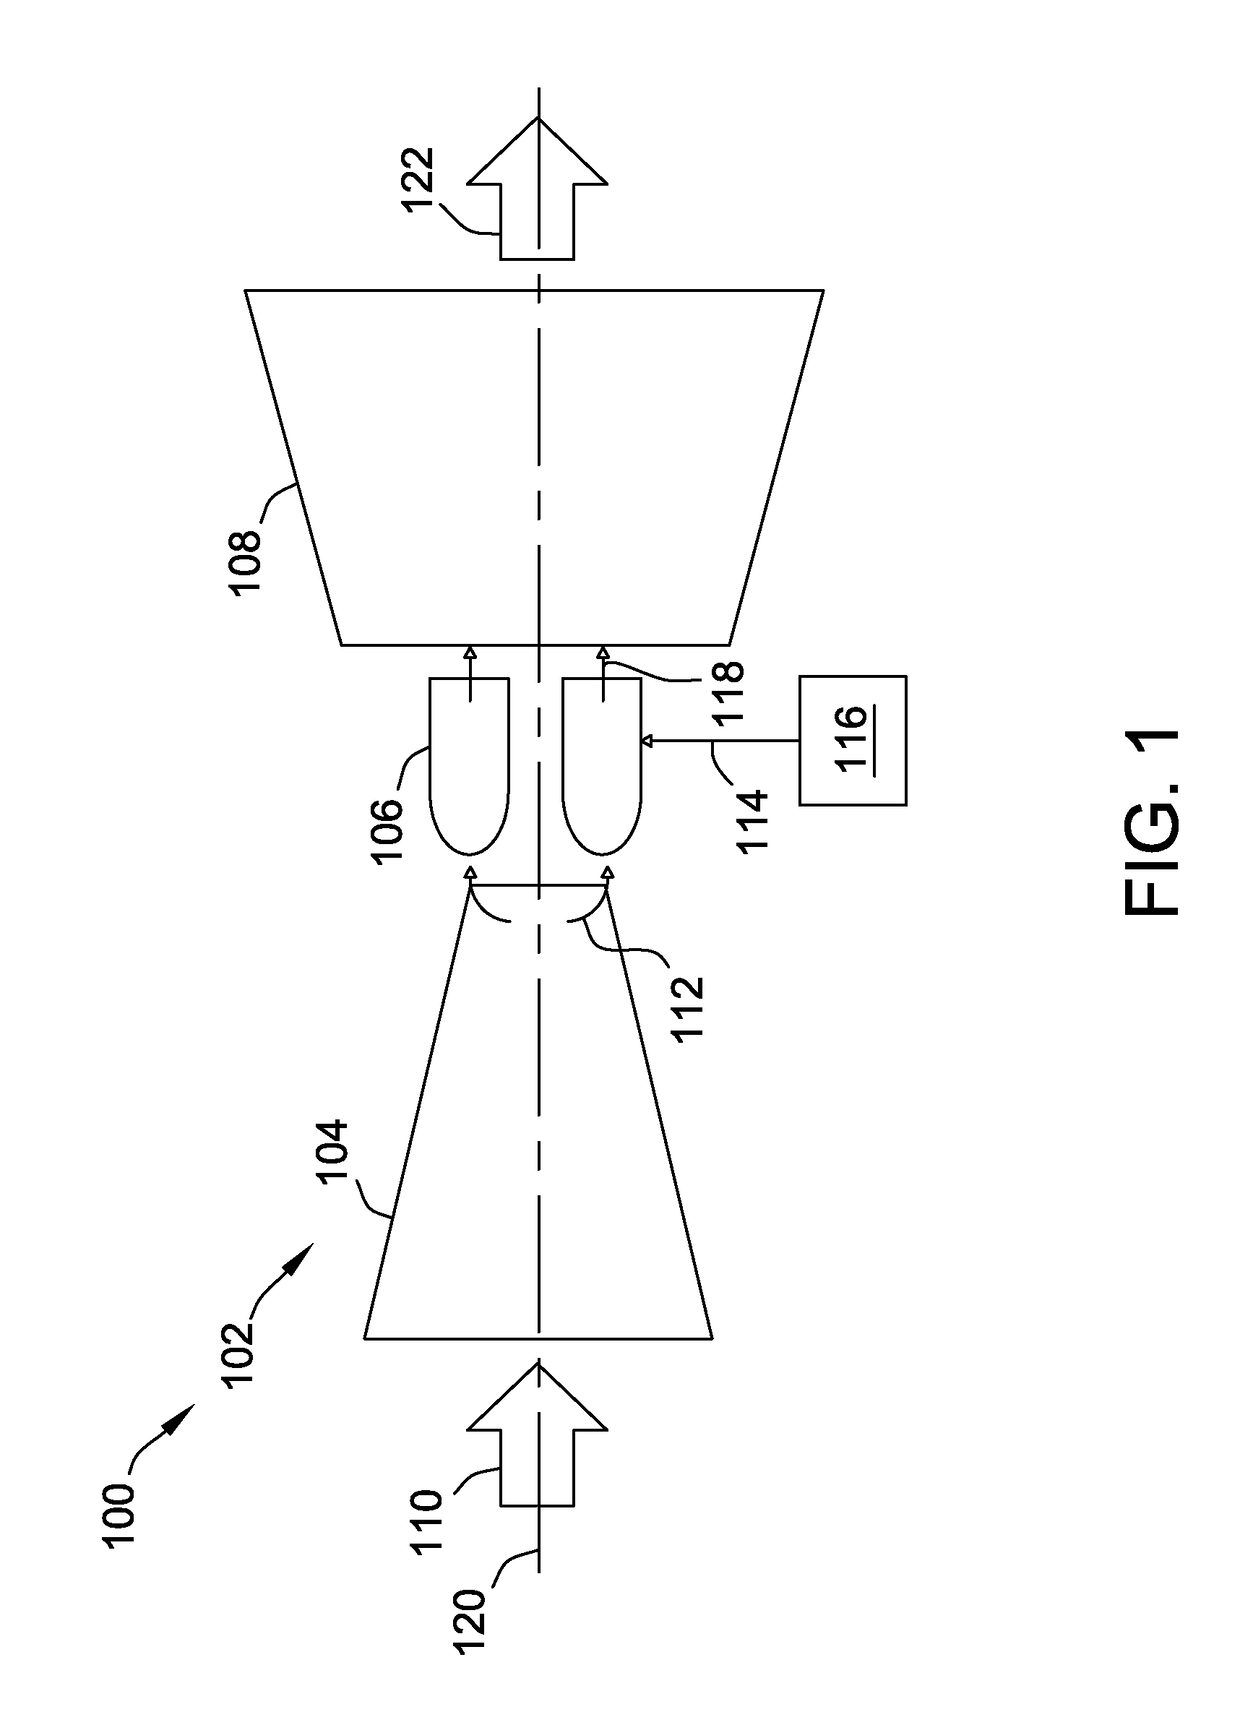 Fuel supply system for turbine engines and methods of assembling same